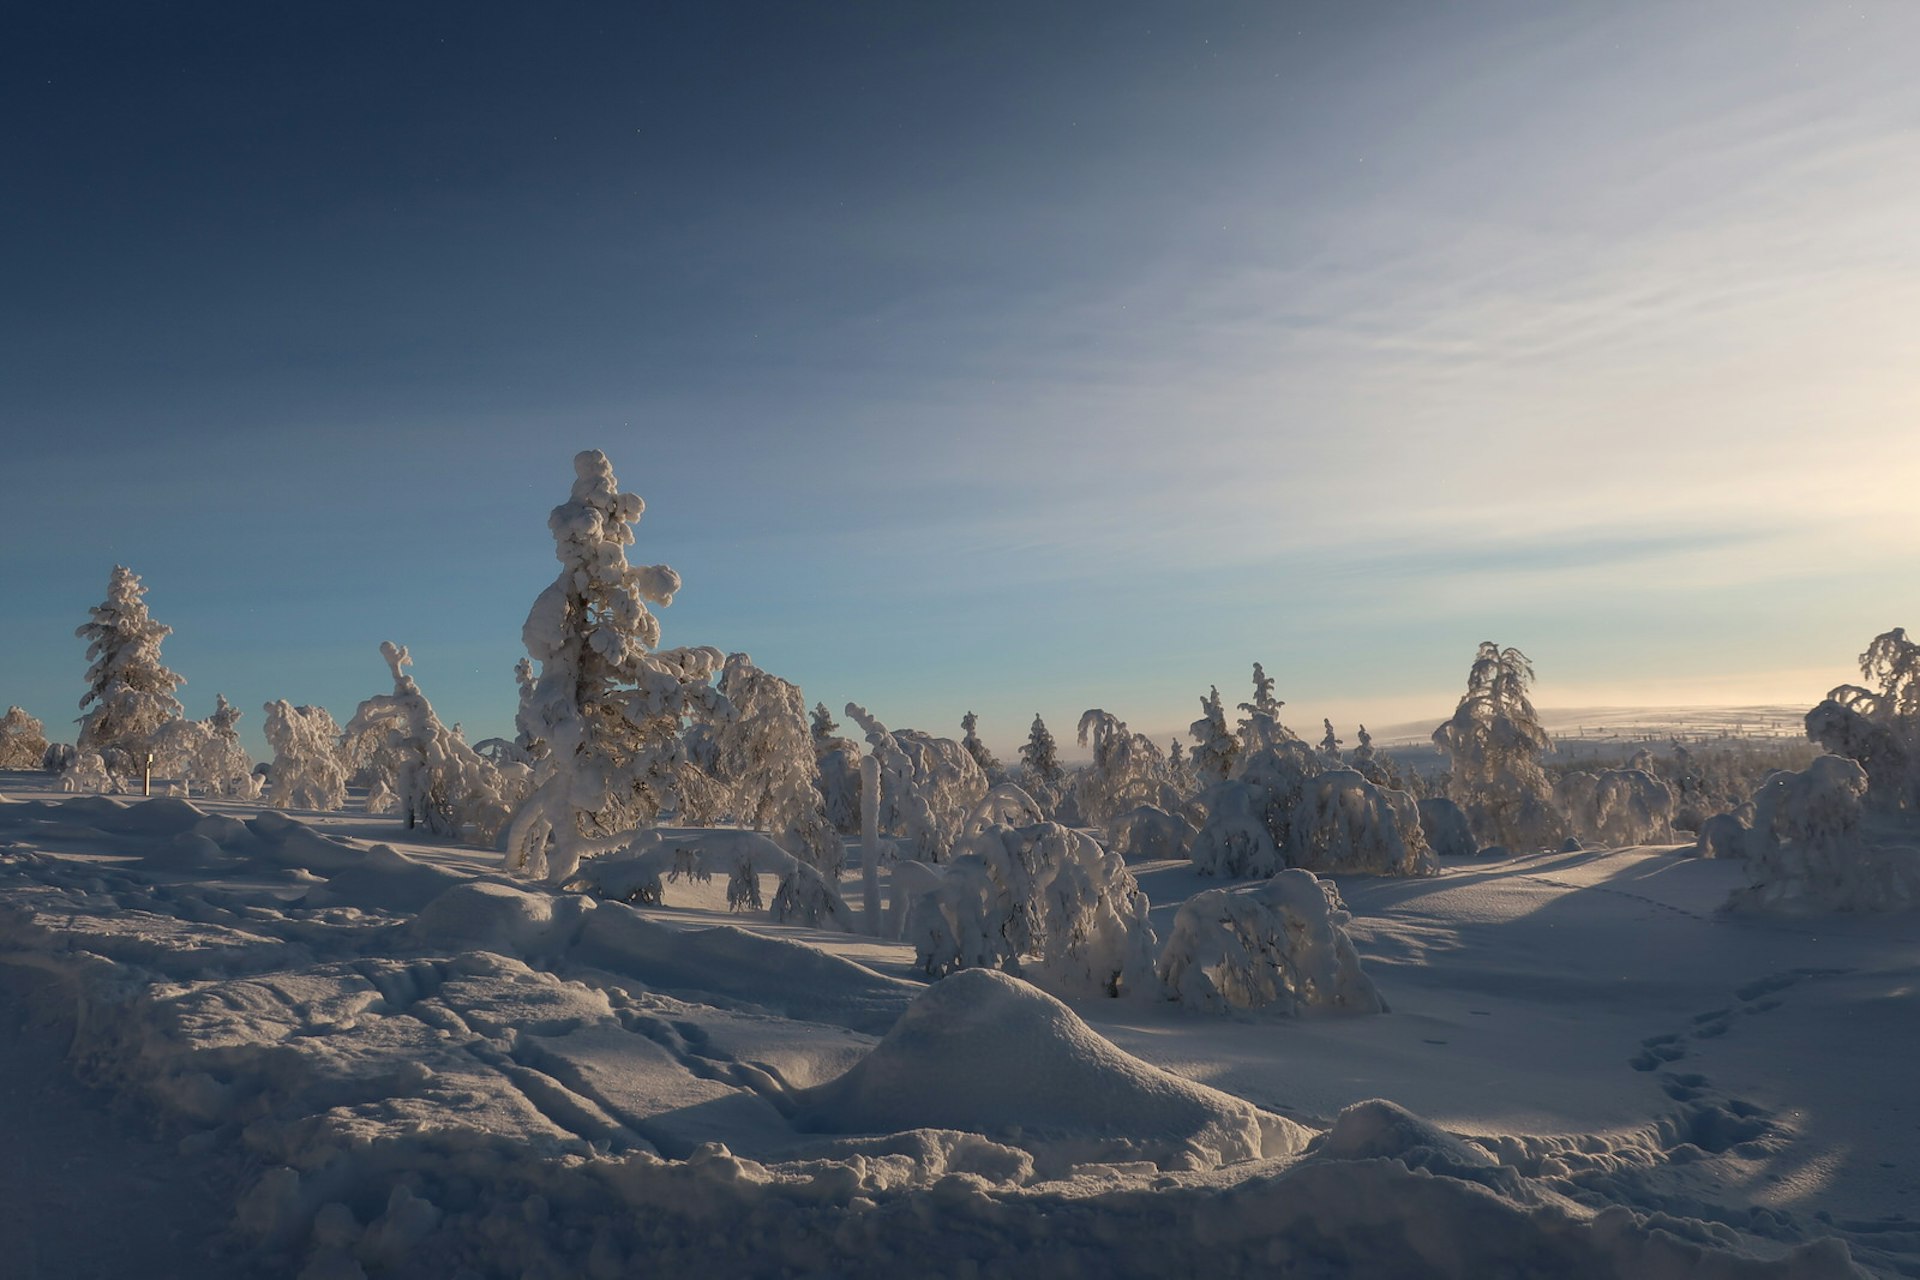 Snowy landscape shot of Saariselkä's rolling hills bathed in soft sunlight, with many pine trees drooping under the weight of the snow